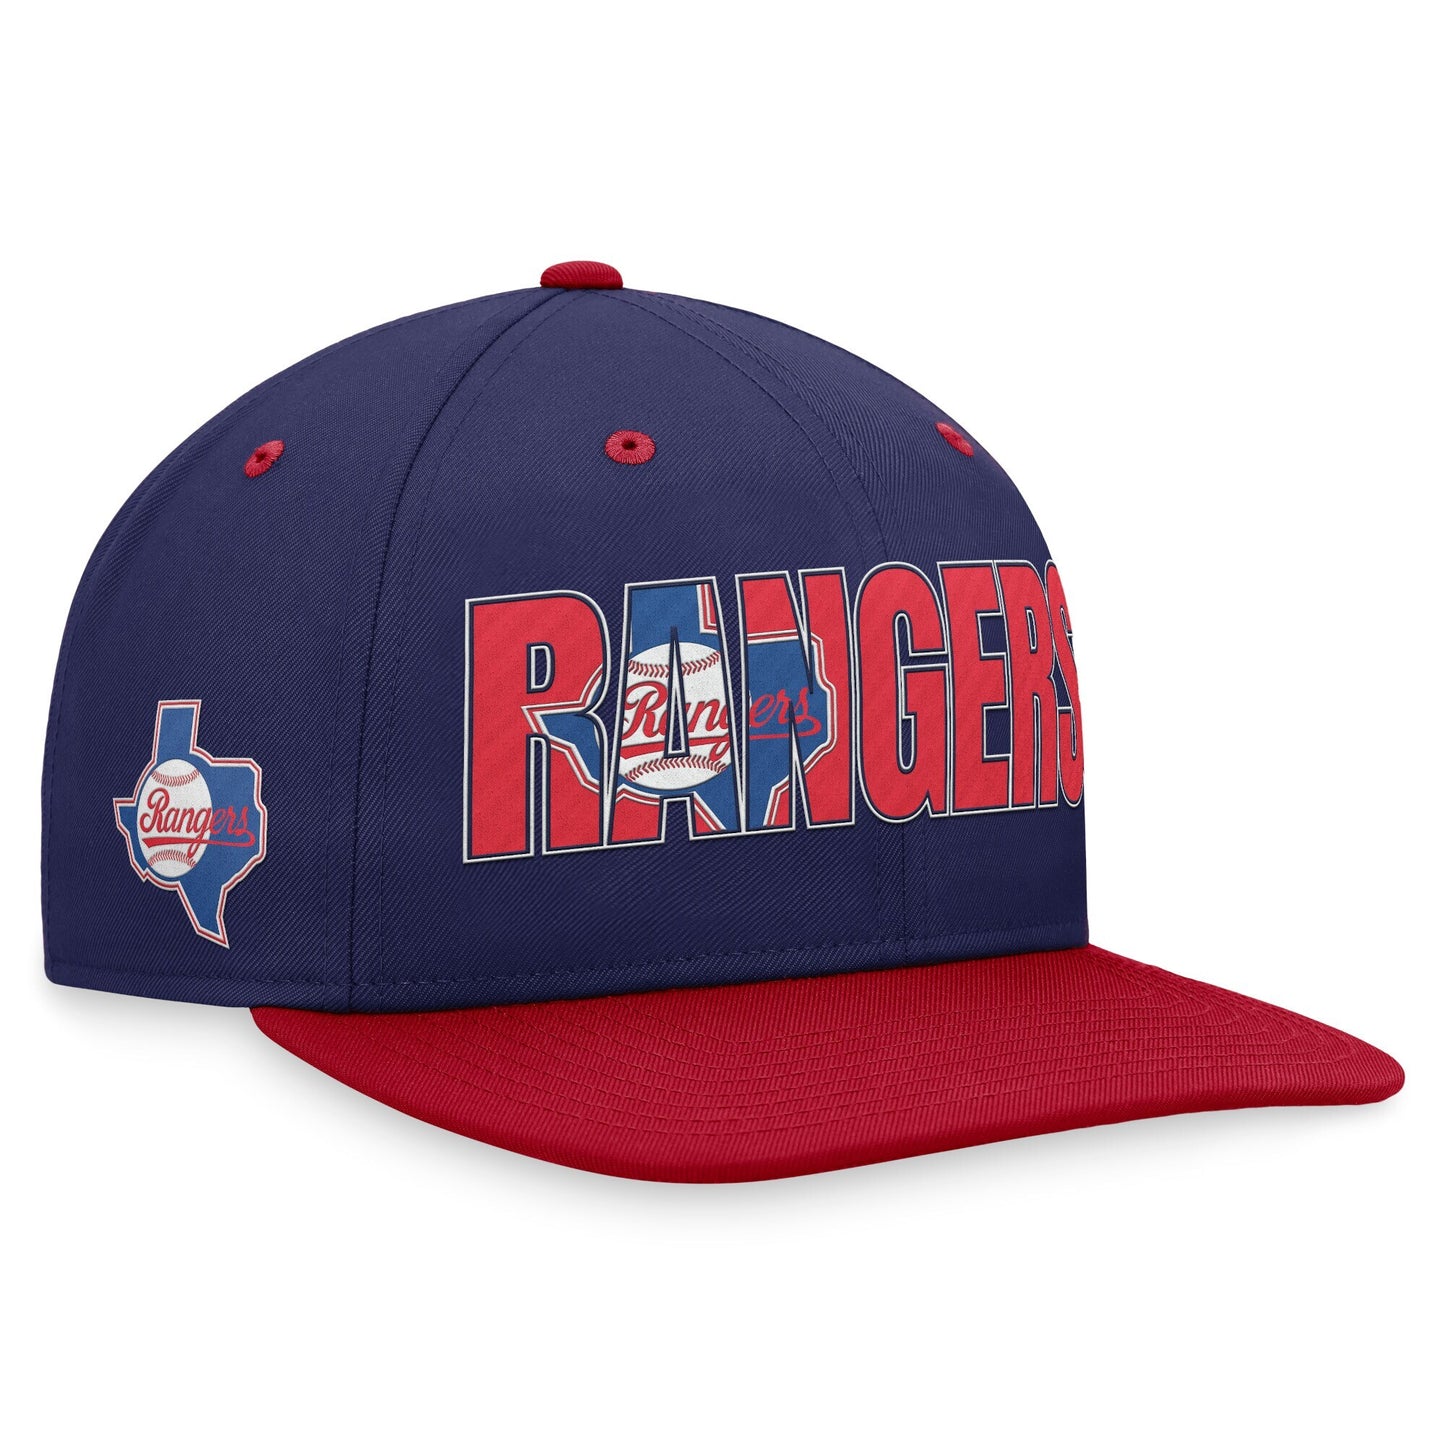 Texas Rangers Nike Cooperstown Collection Pro Snapback Hat - Royal